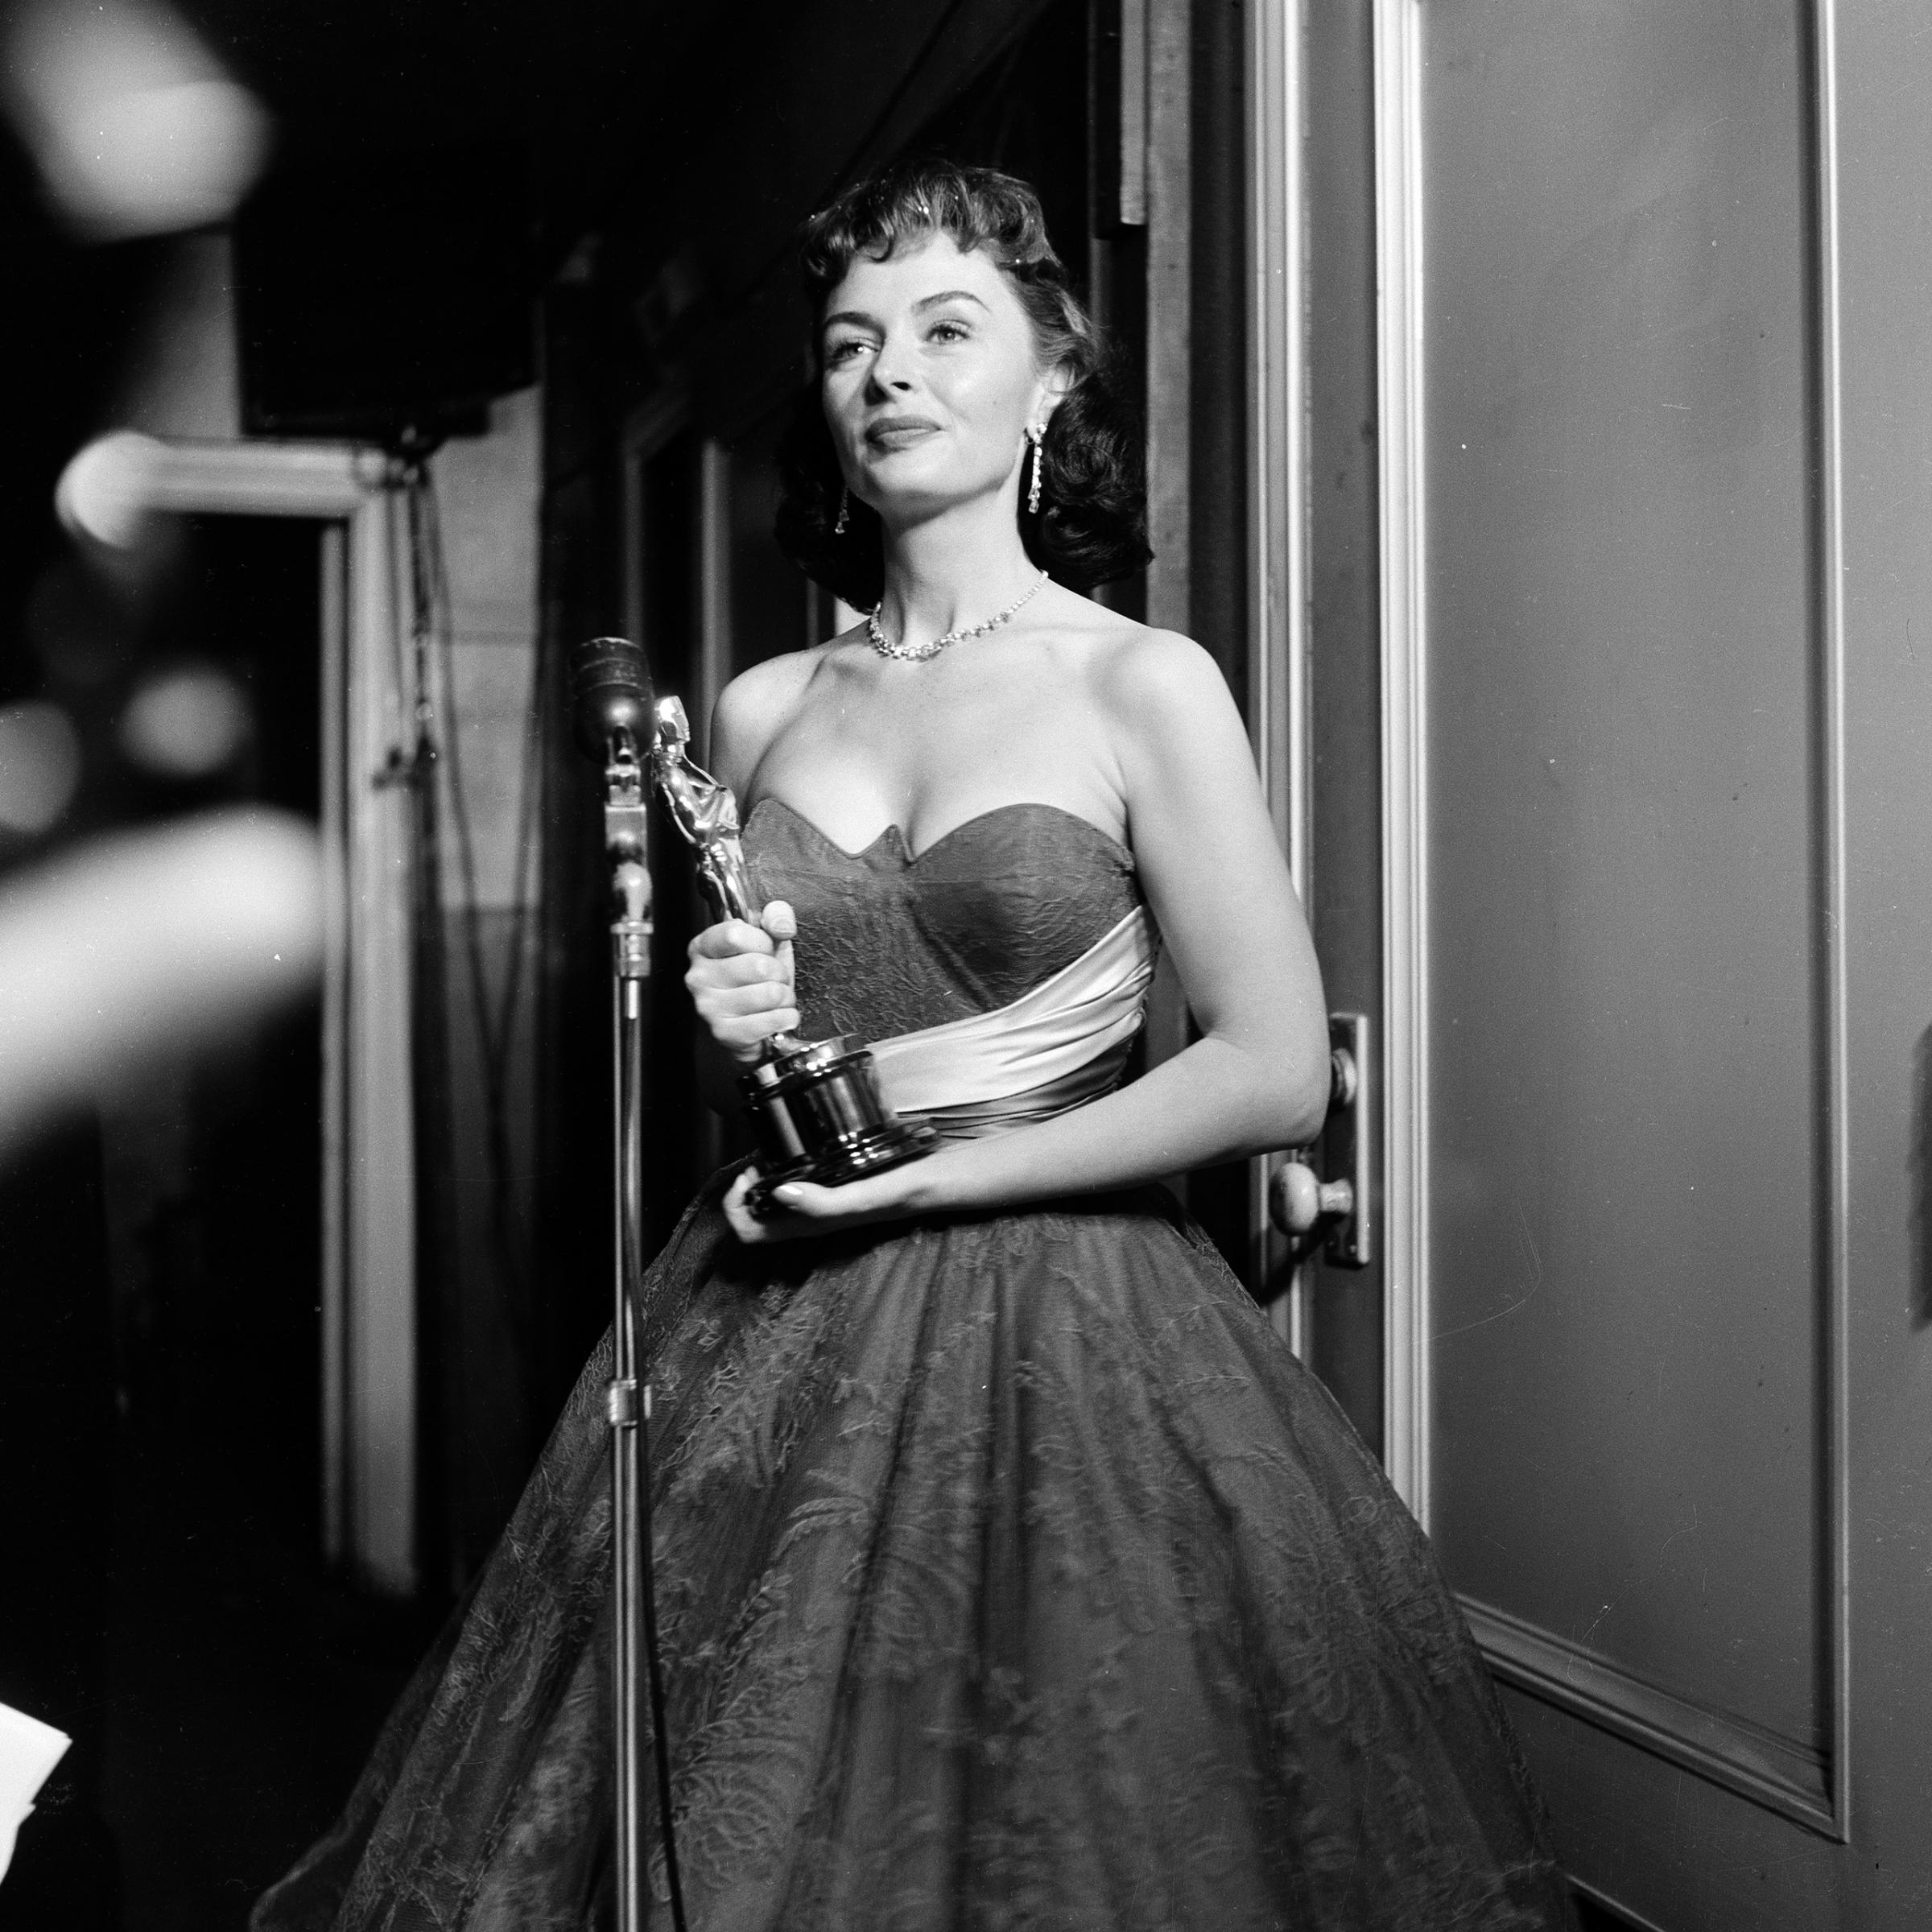 Donna Reed poses with her Oscar for Best Supporting Actress in "From Here to Eternity" at the Academy Awards, 1954.